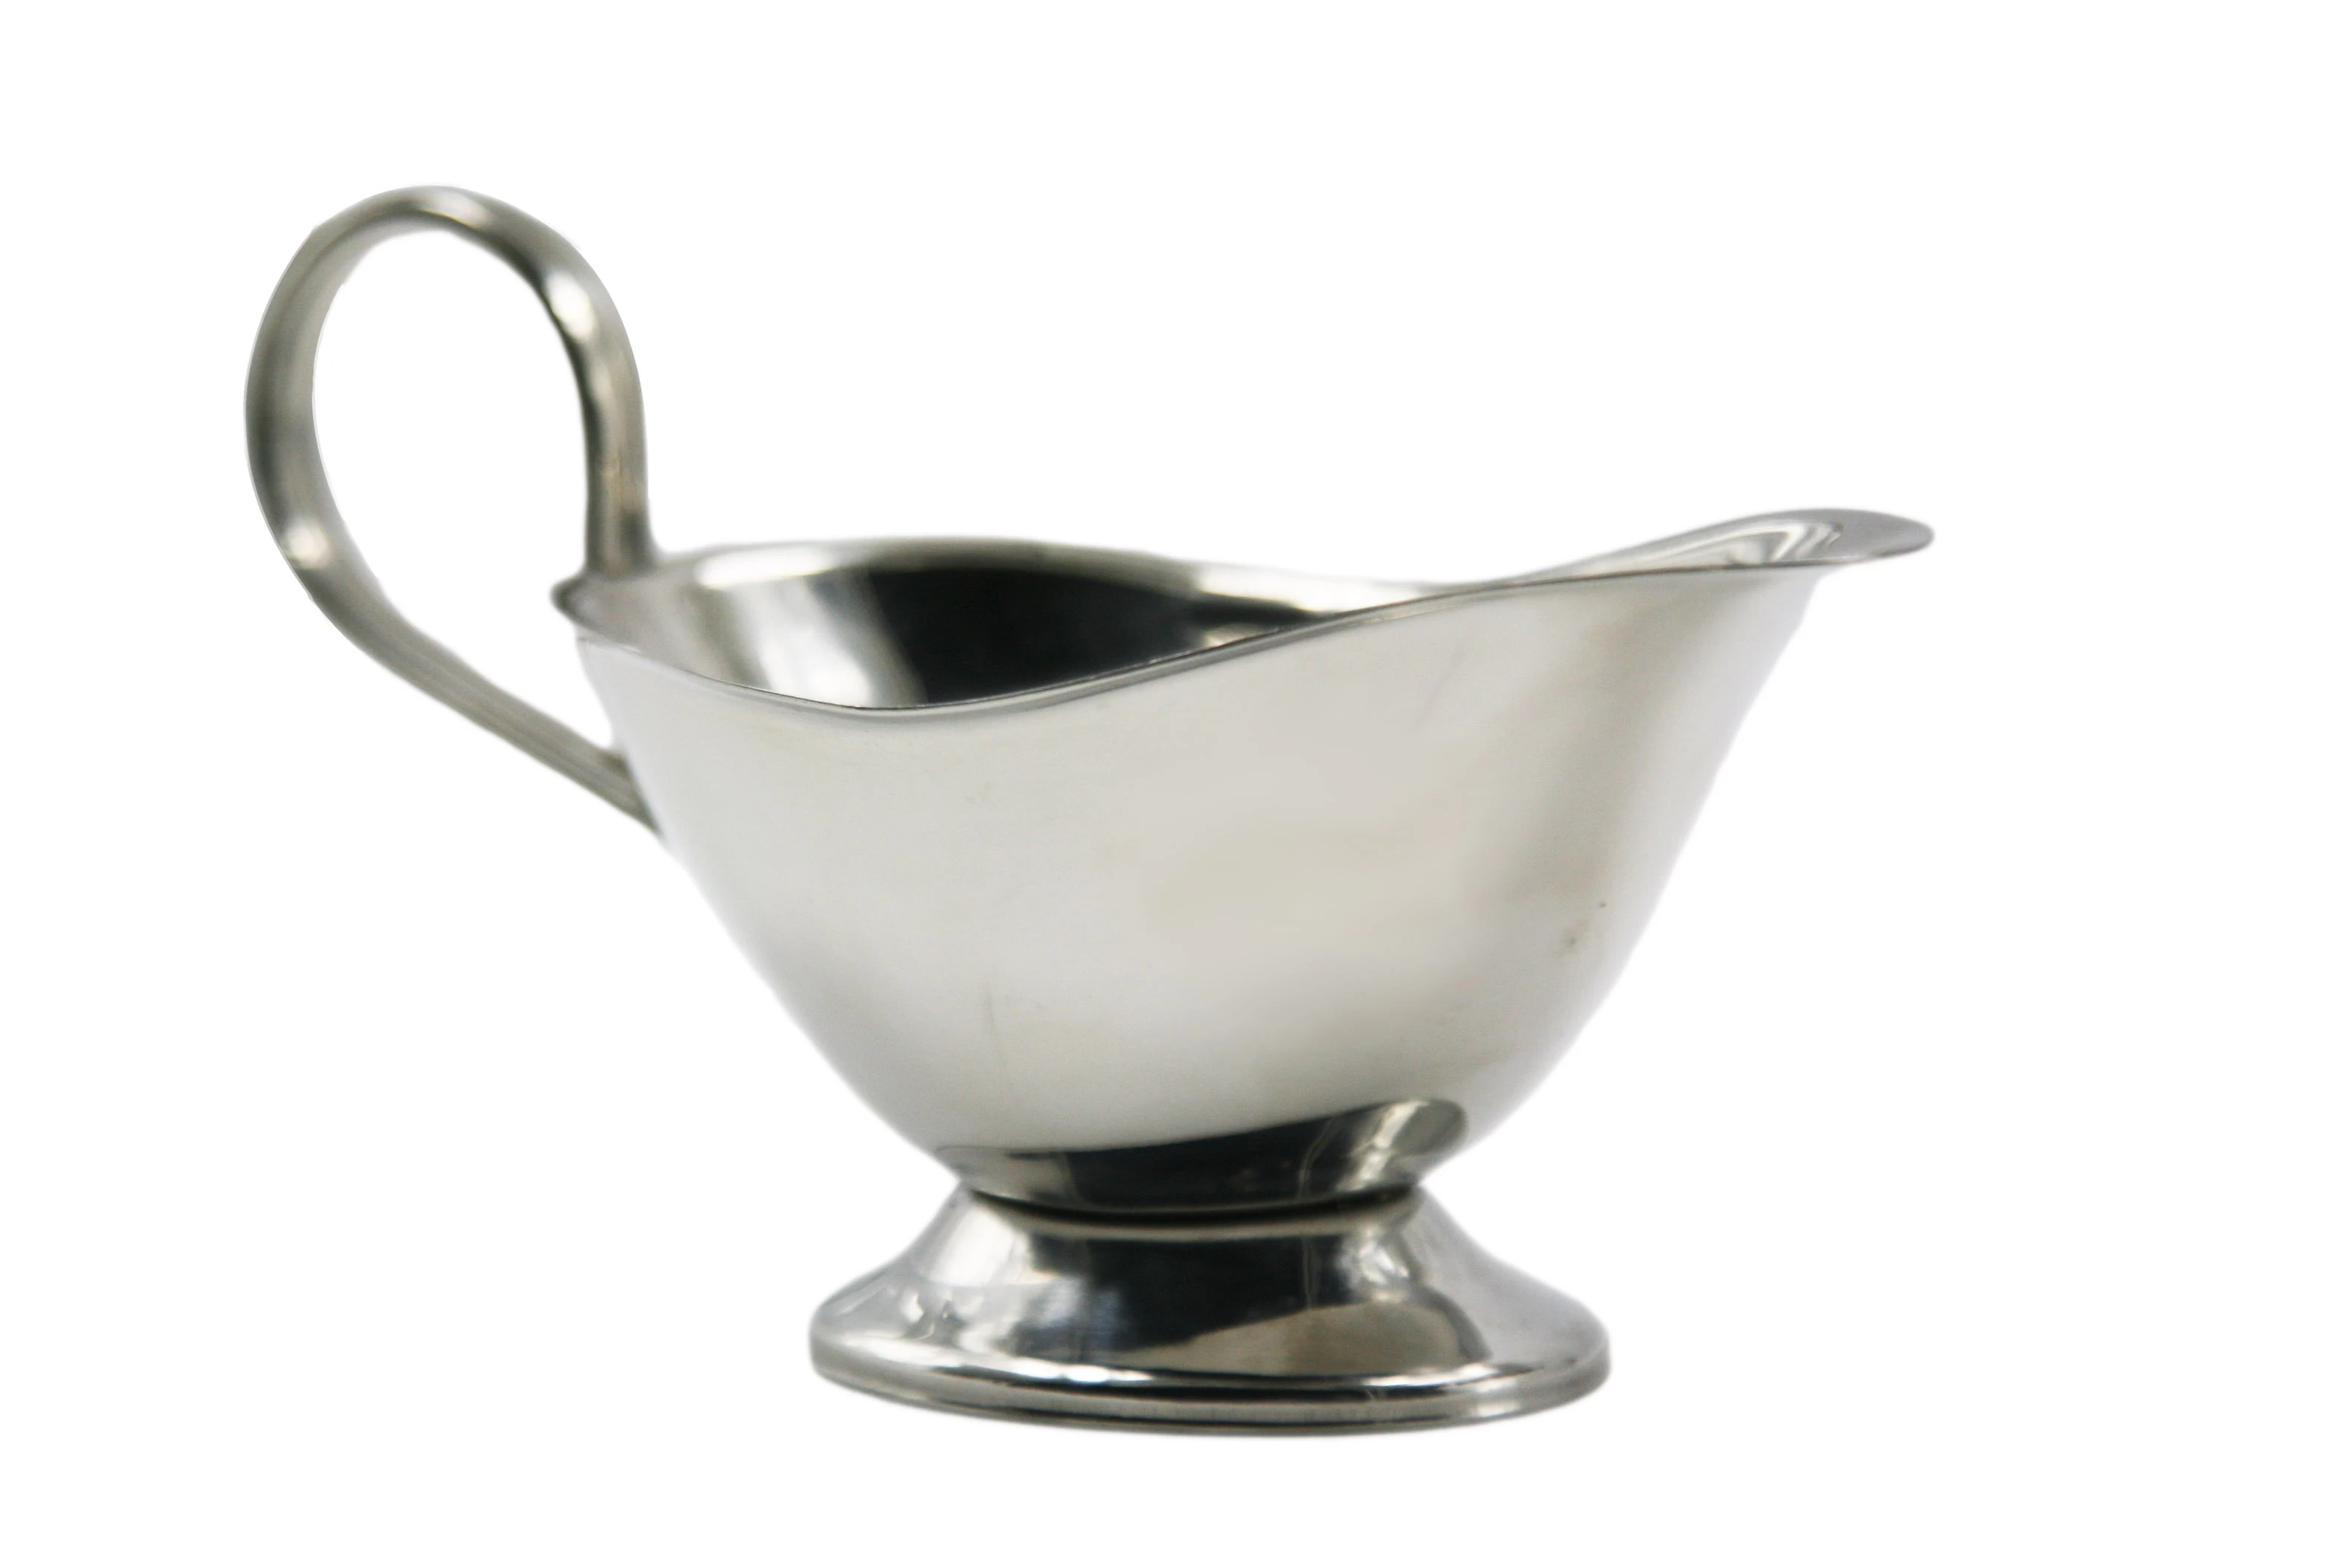 Stainless steel high quality classic style Sauce boat EB-SB001